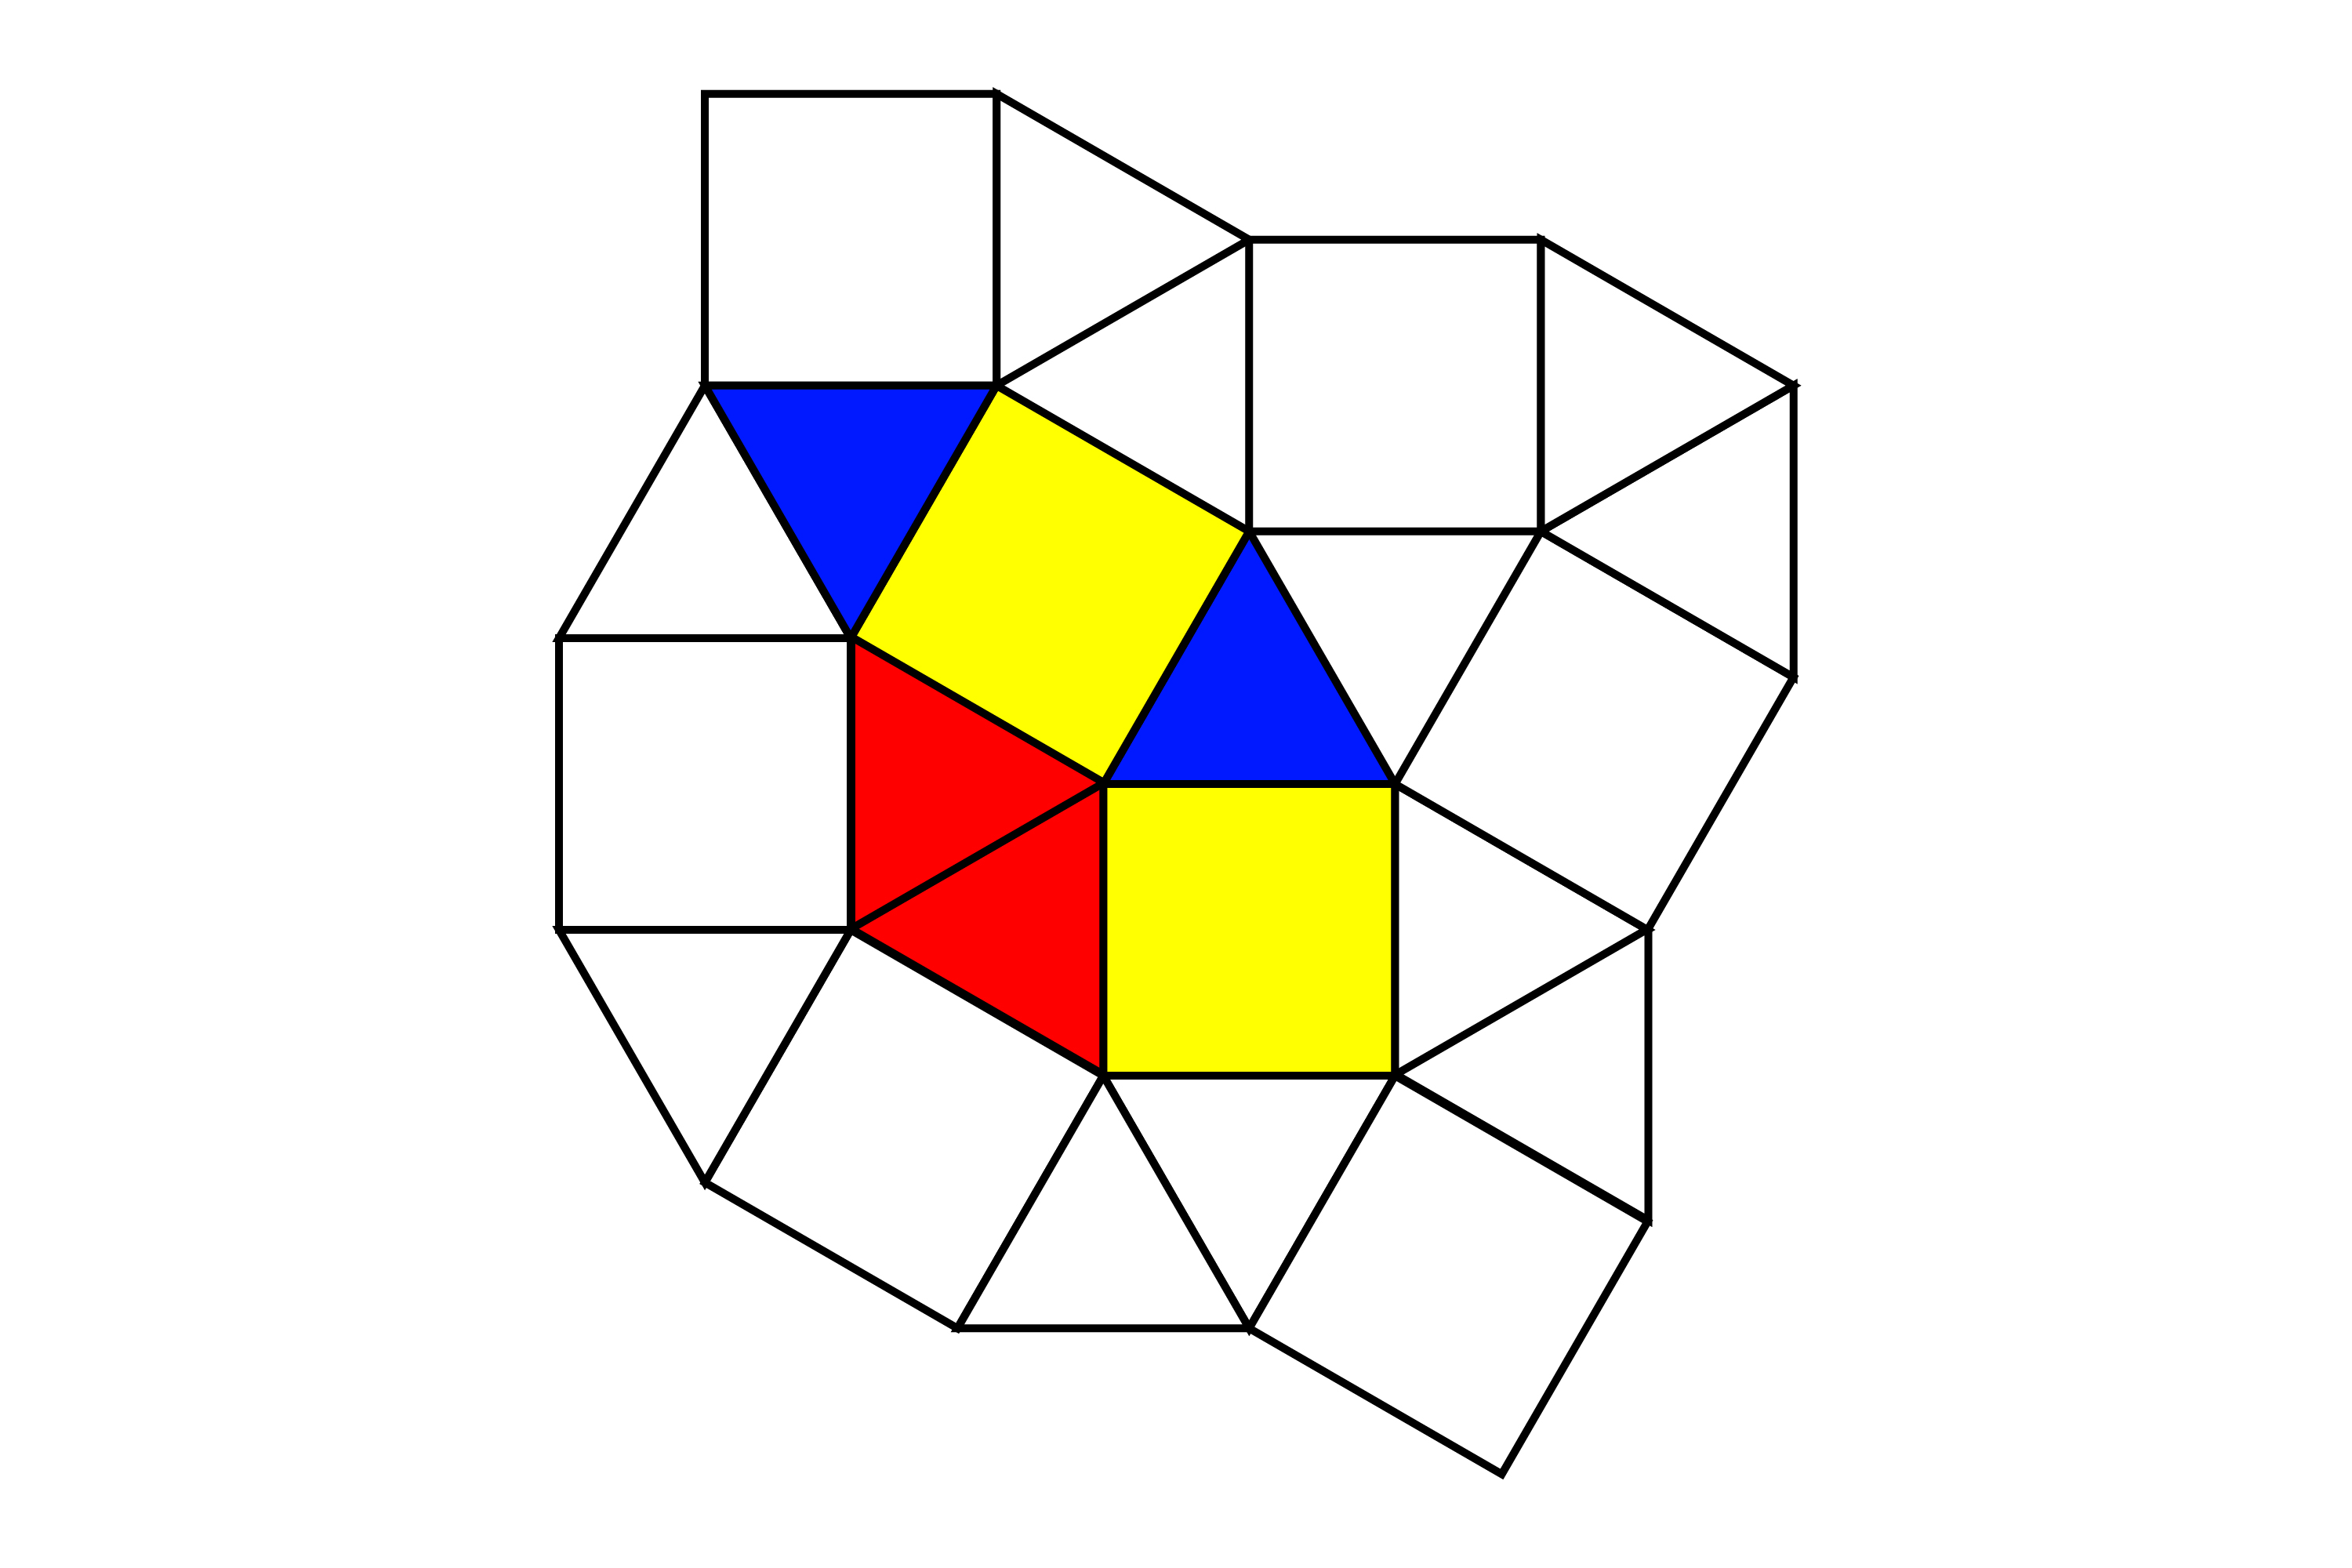 Why can equilateral triangles and squares form a tessellation